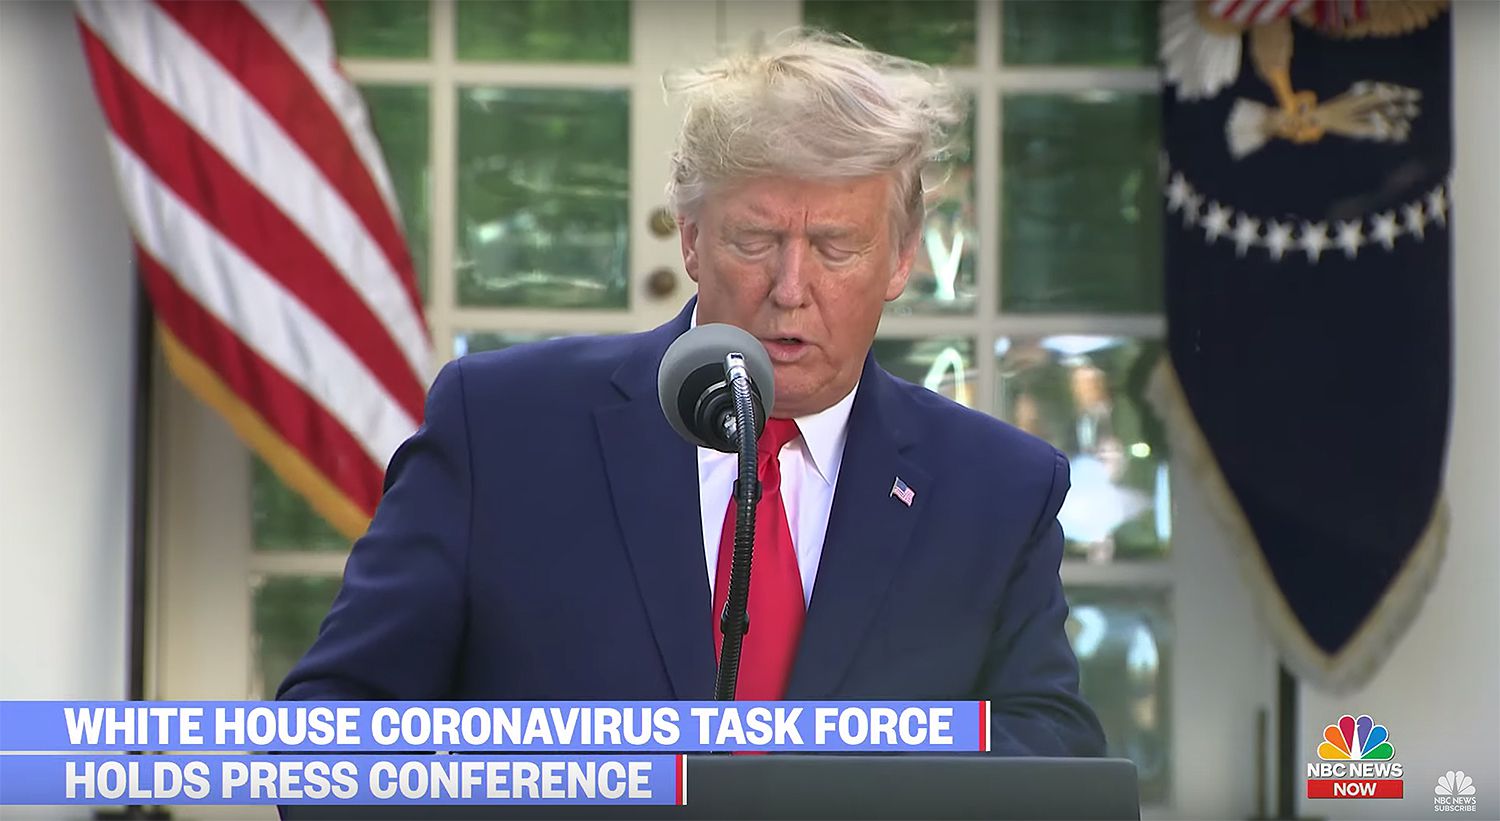 Trump Stops COVID-19 Briefing to Say Hair Is Real | PEOPLE.com